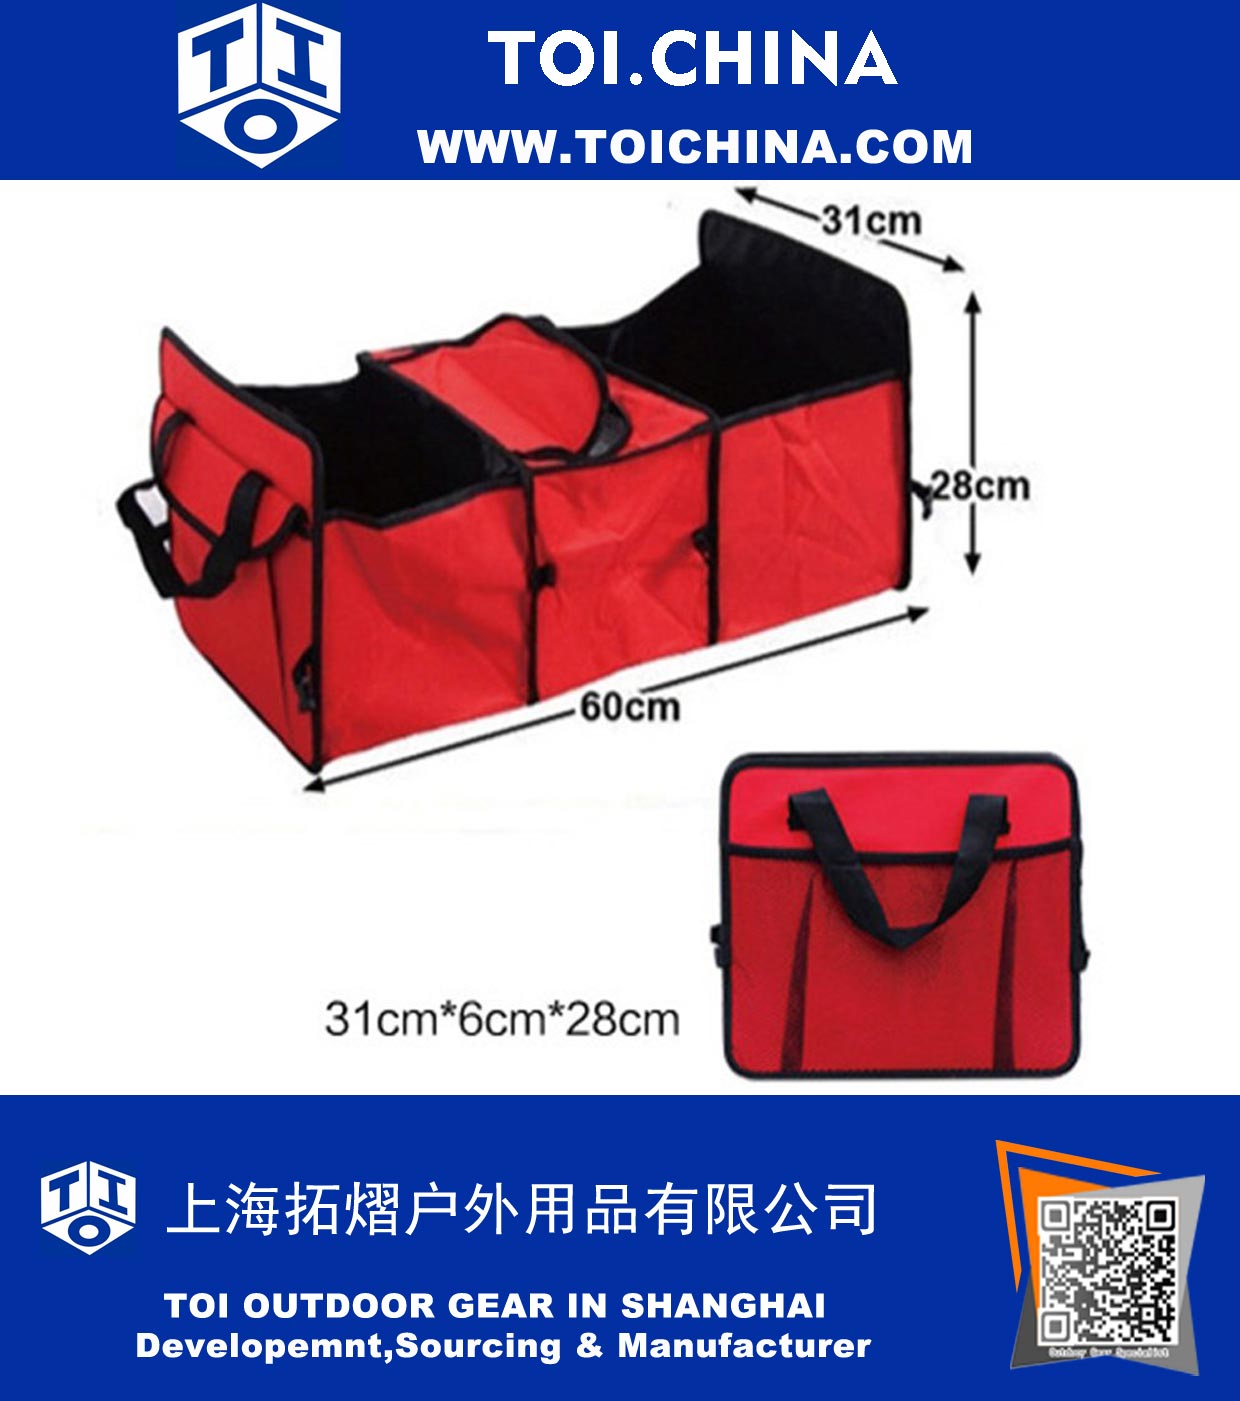 Multipurpose Cargo Storage Bag with a Cooler Bag Flexible Collapsible 3-Compartment Collapsible Car Trunk Organizer